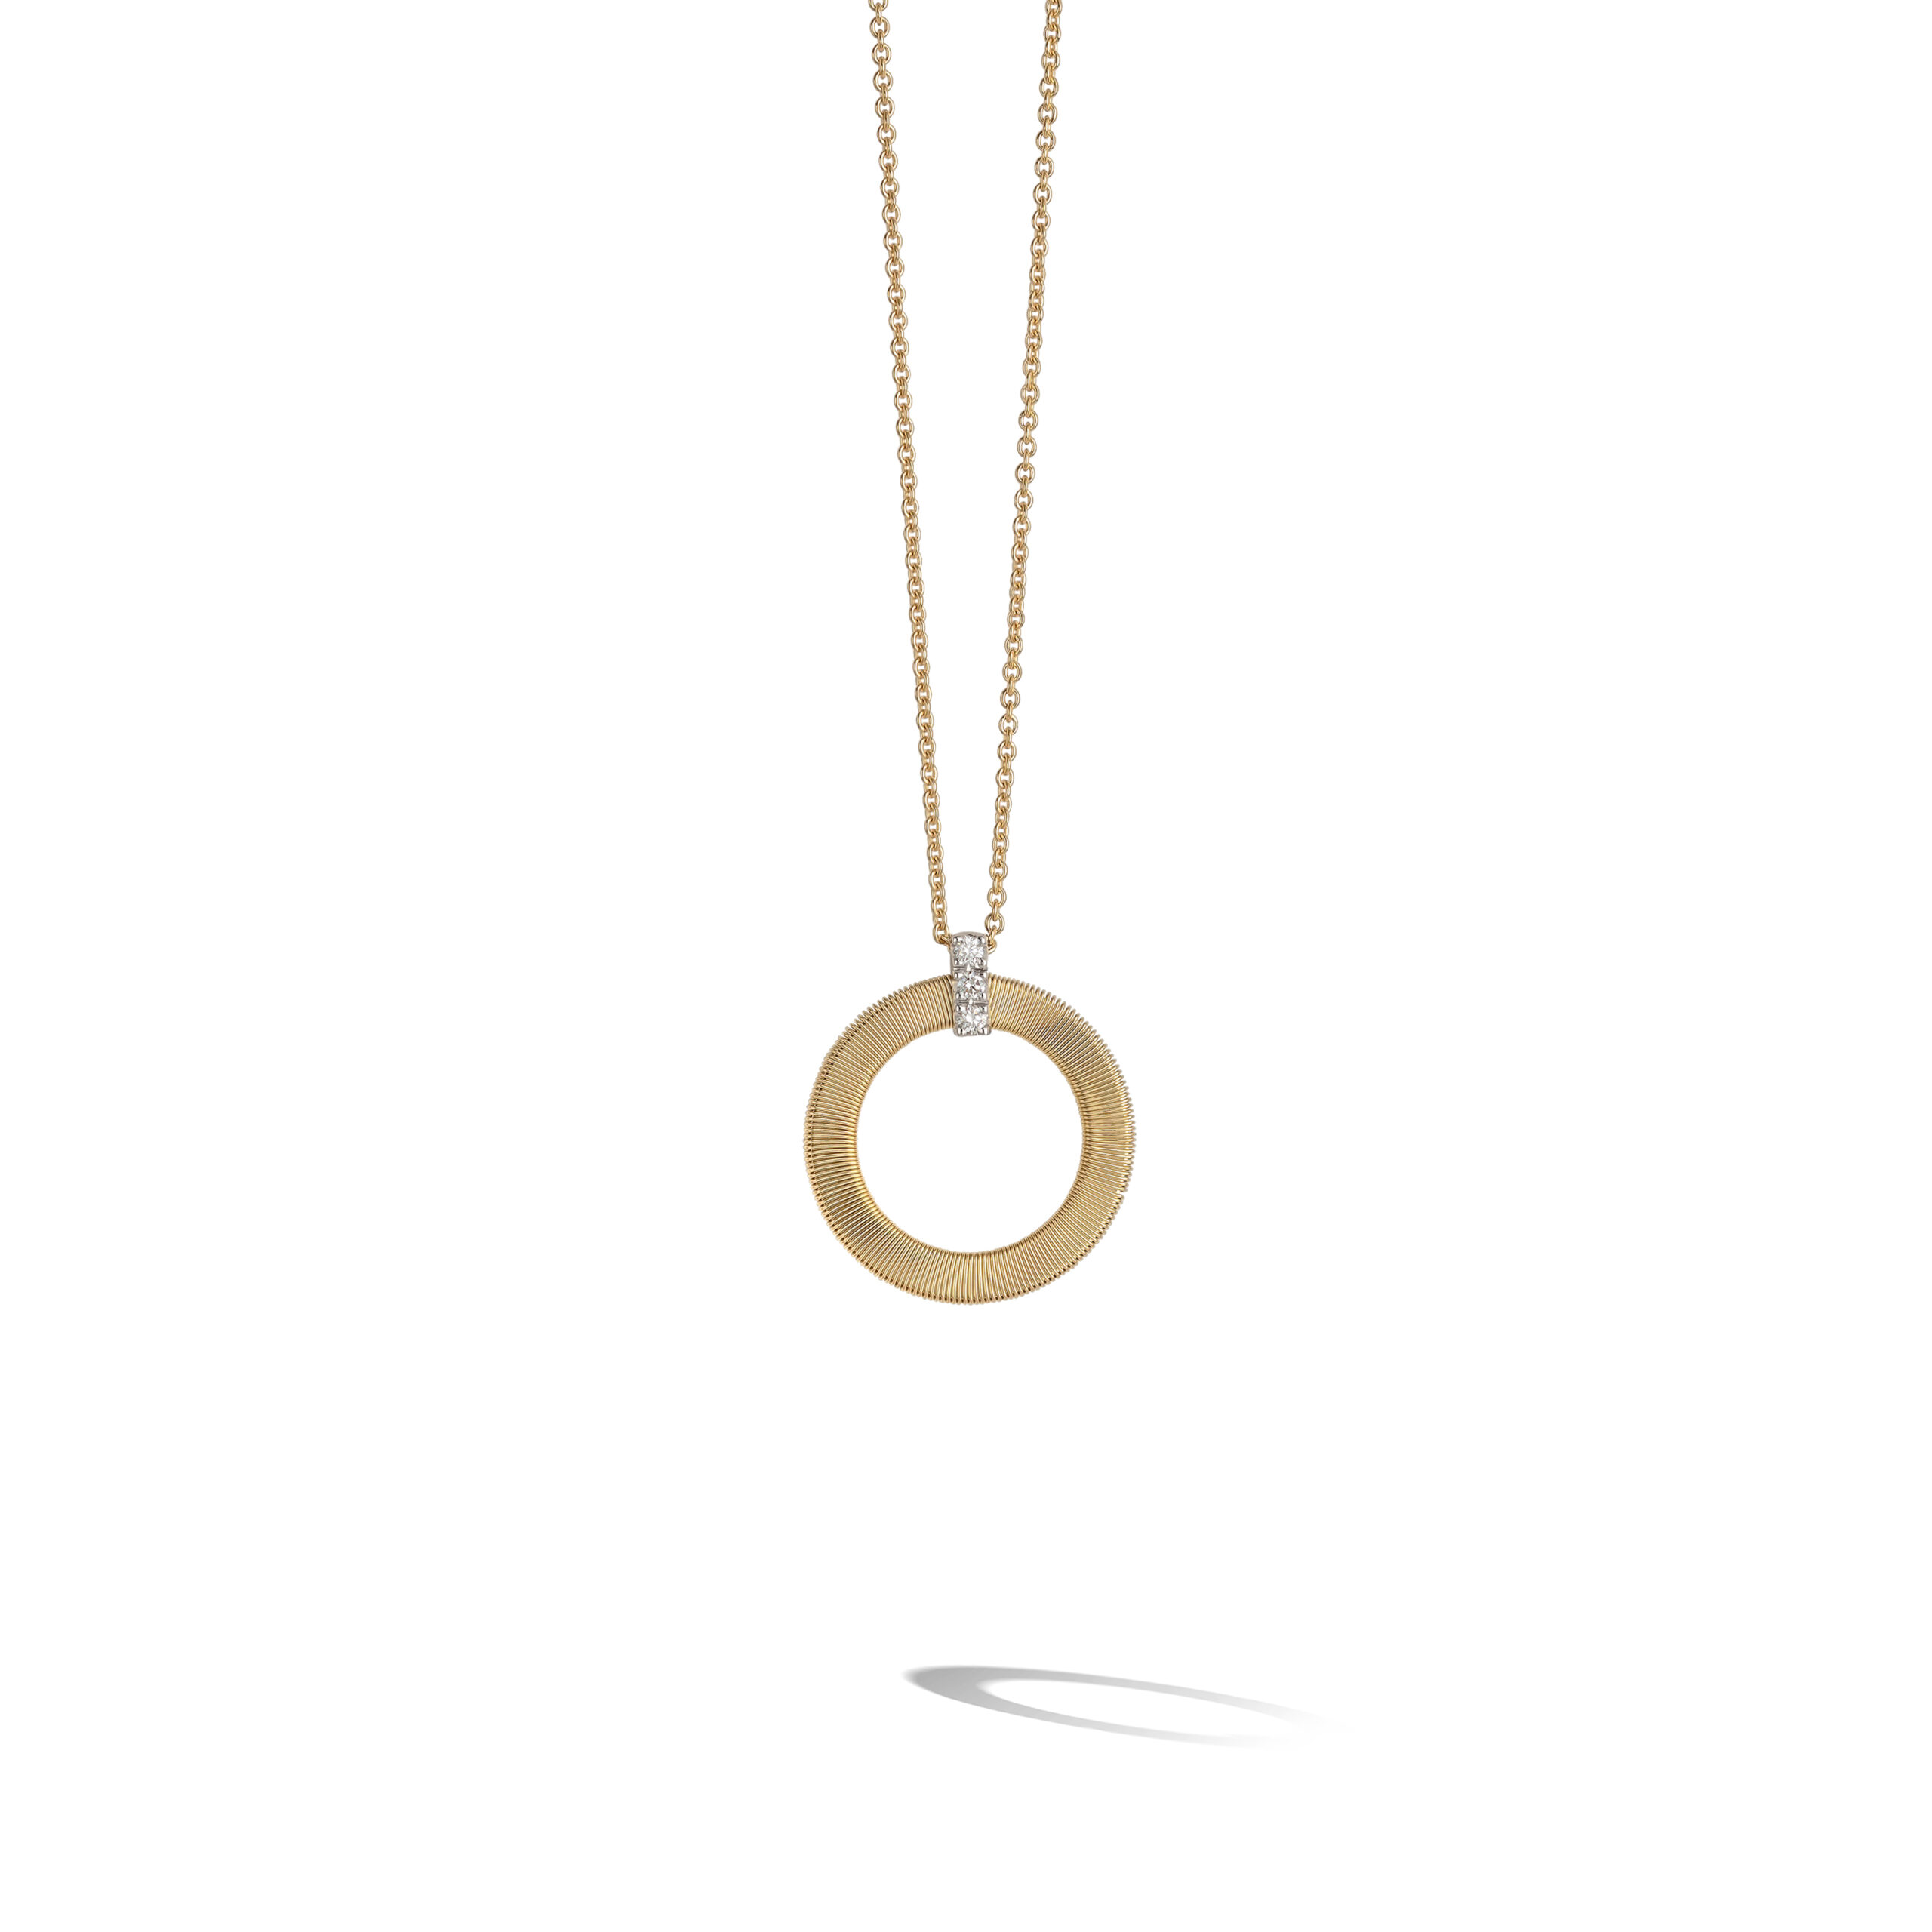 CG797 B YW M5Marco Bicego Masai Collection 18k Yellow Gold and Diamond Single Circle Short Necklace